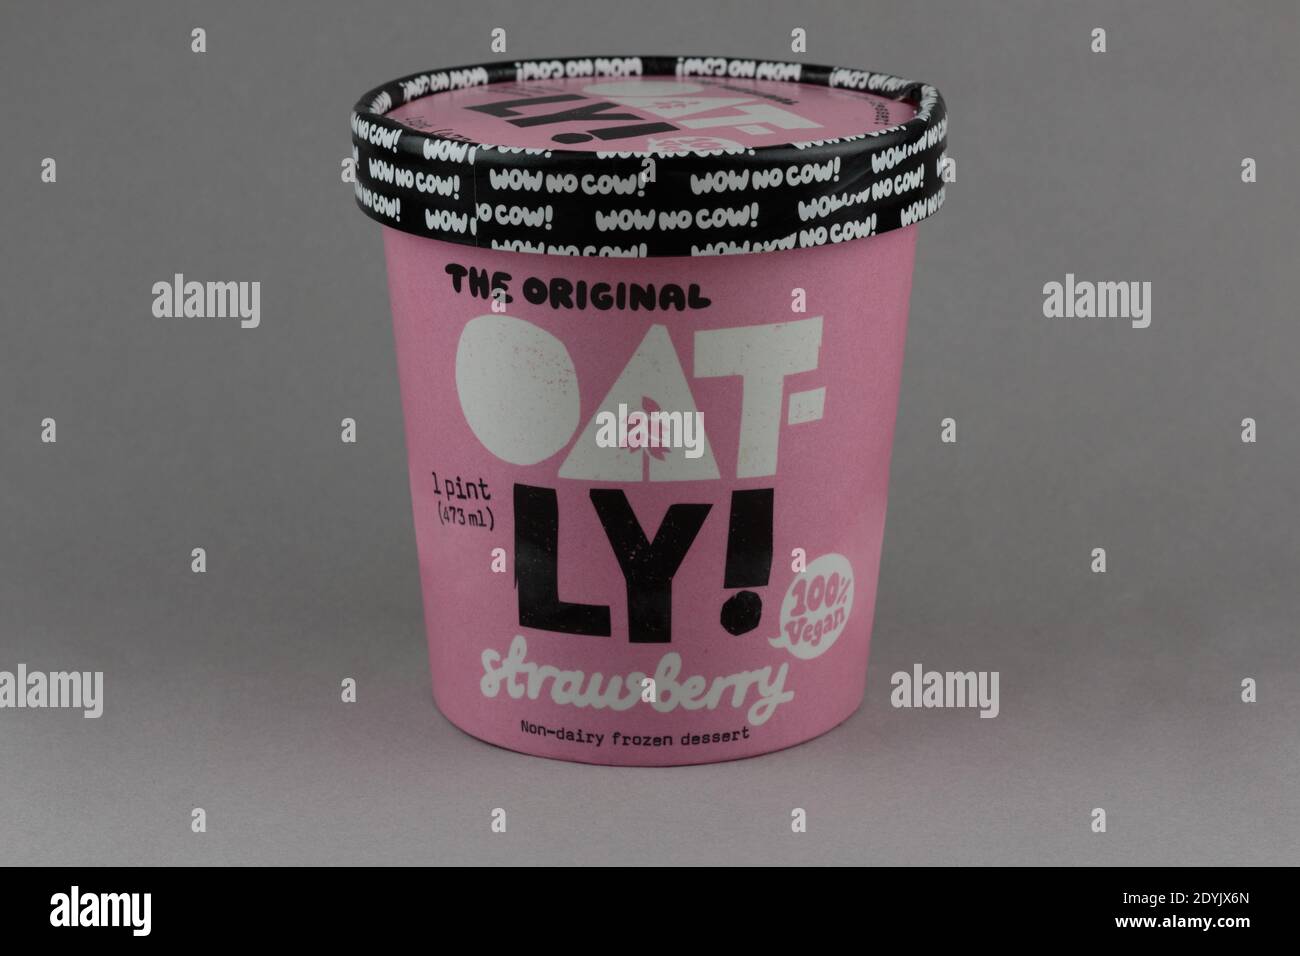 illustrative editorial of a pint of oatly brand strawberry vegan ice cream made with oat milk, a dairy alternative, on a grey background Stock Photo